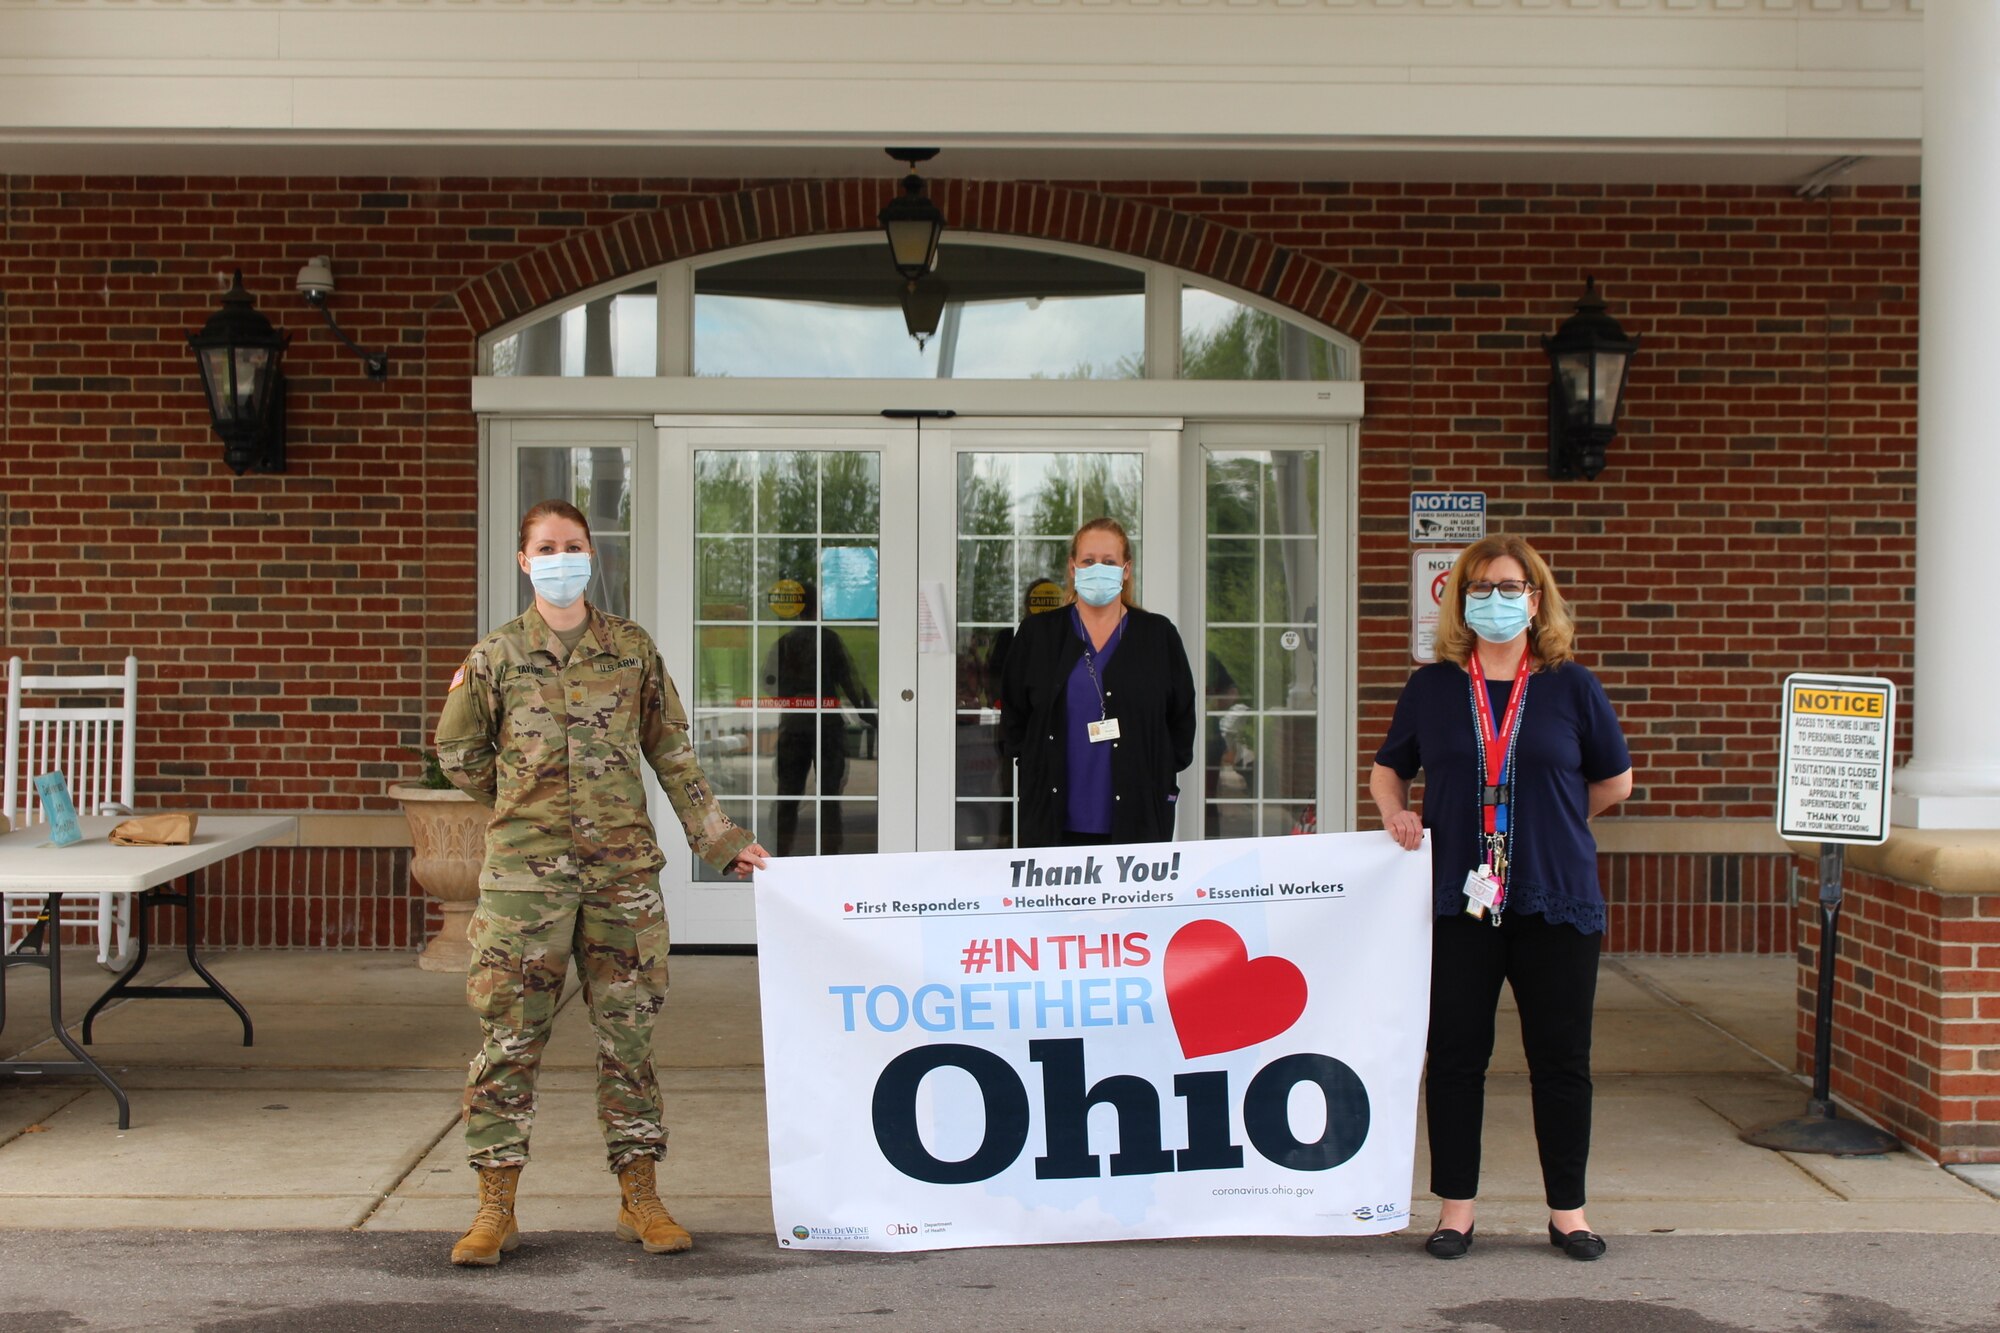 Maj. Jessica Taylor (from left), commander of Company C, 237th Support Battalion, holds an “#In This Together Ohio” banner along with Ohio Veterans Home-Georgetown staff members Heather Doss, director of nursing, and Linda Slone, the facility administrator, at the Ohio Veterans Home in Georgetown, Ohio. In support of the Ohio Department of Veterans Services, Taylor recently led a team of Ohio National Guard medical personnel that conducted COVID-19 testing at the facility and also provided a supply of personal protective equipment. (Photo courtesy of Ohio Department of Veterans Services)